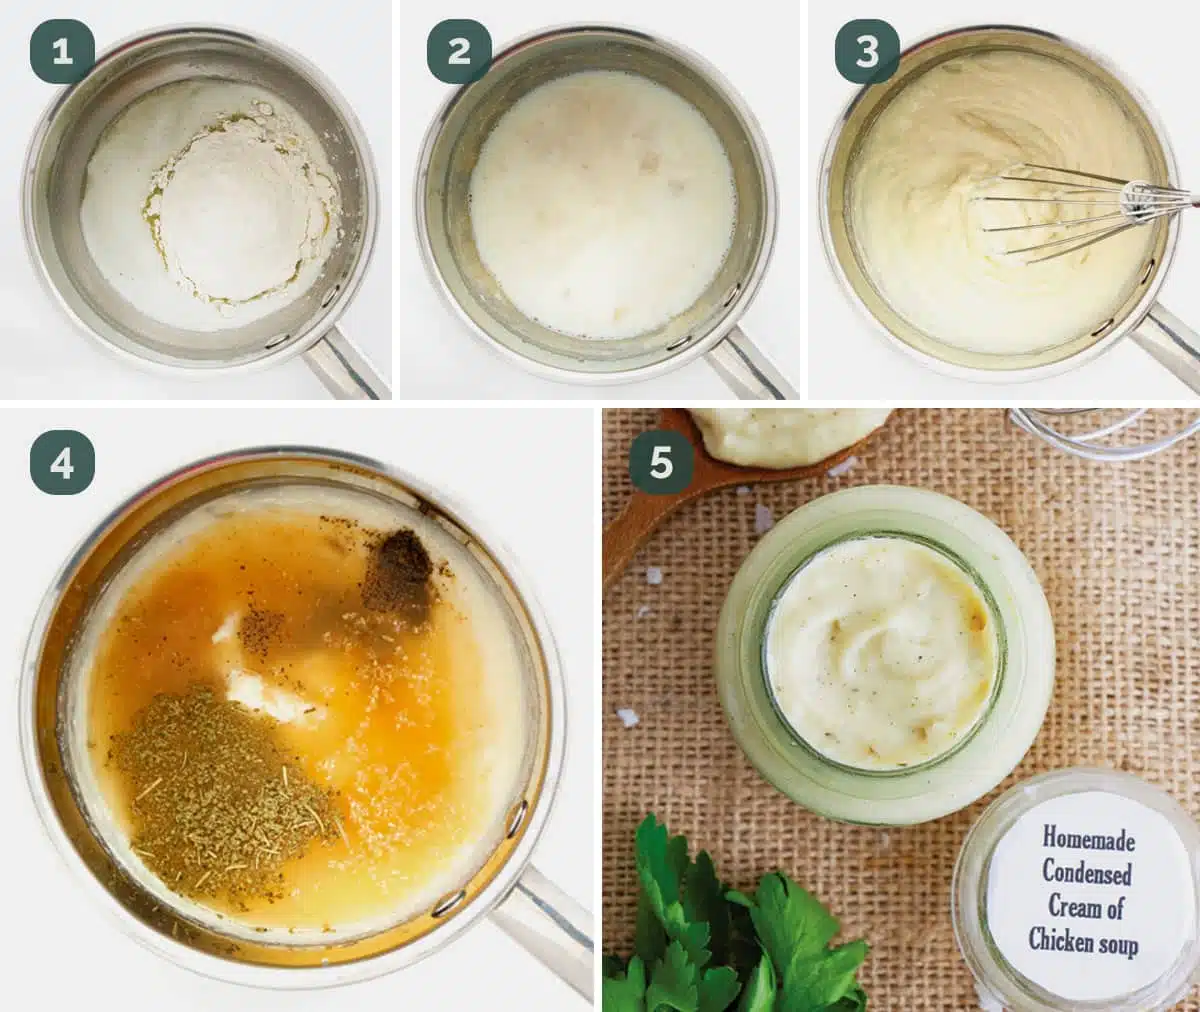 process shots showing how to make condensed cream of chicken soup.